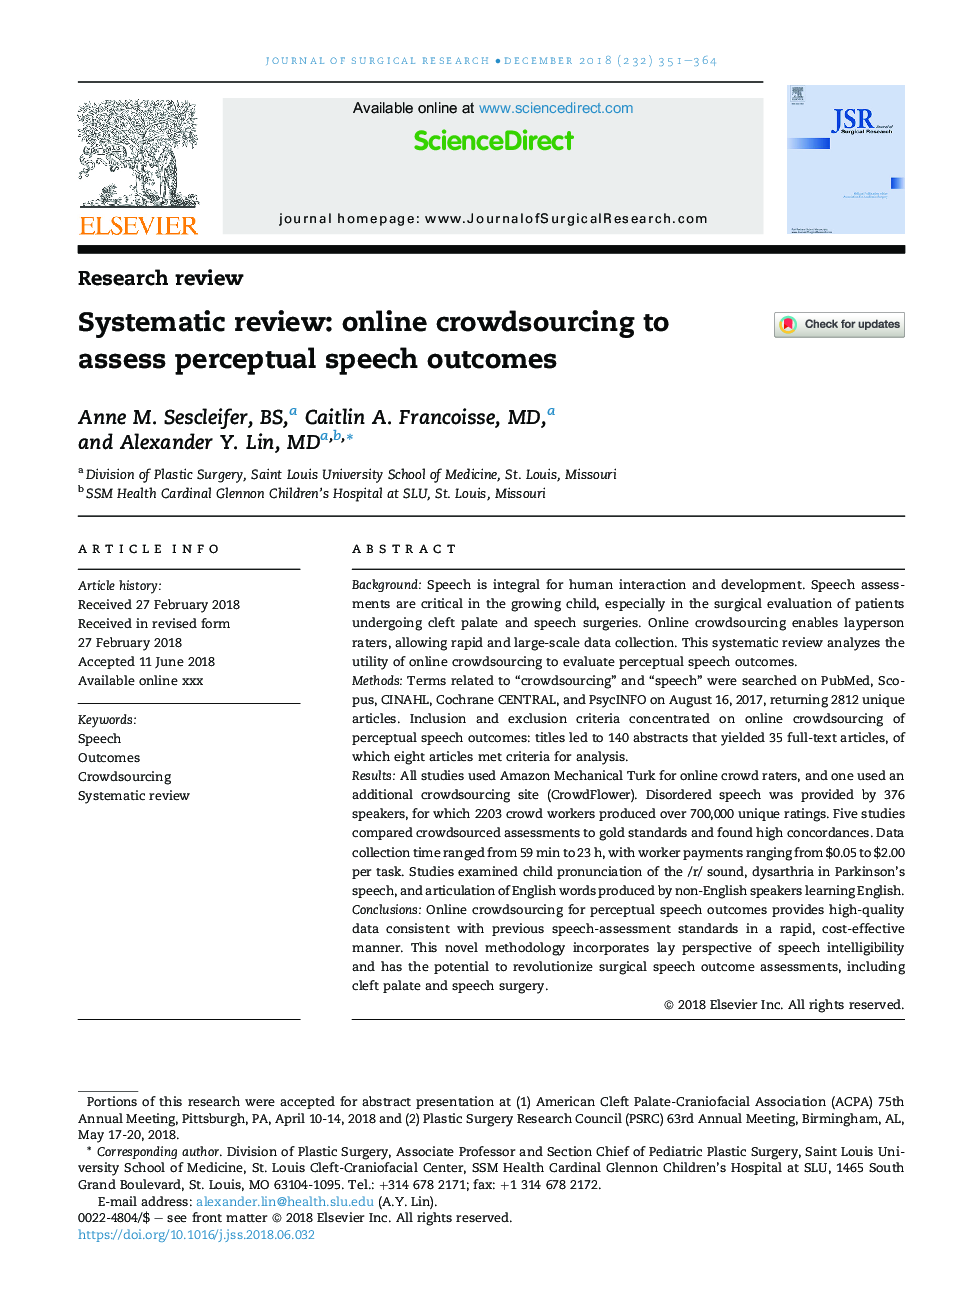 Systematic review: online crowdsourcing to assess perceptual speech outcomes